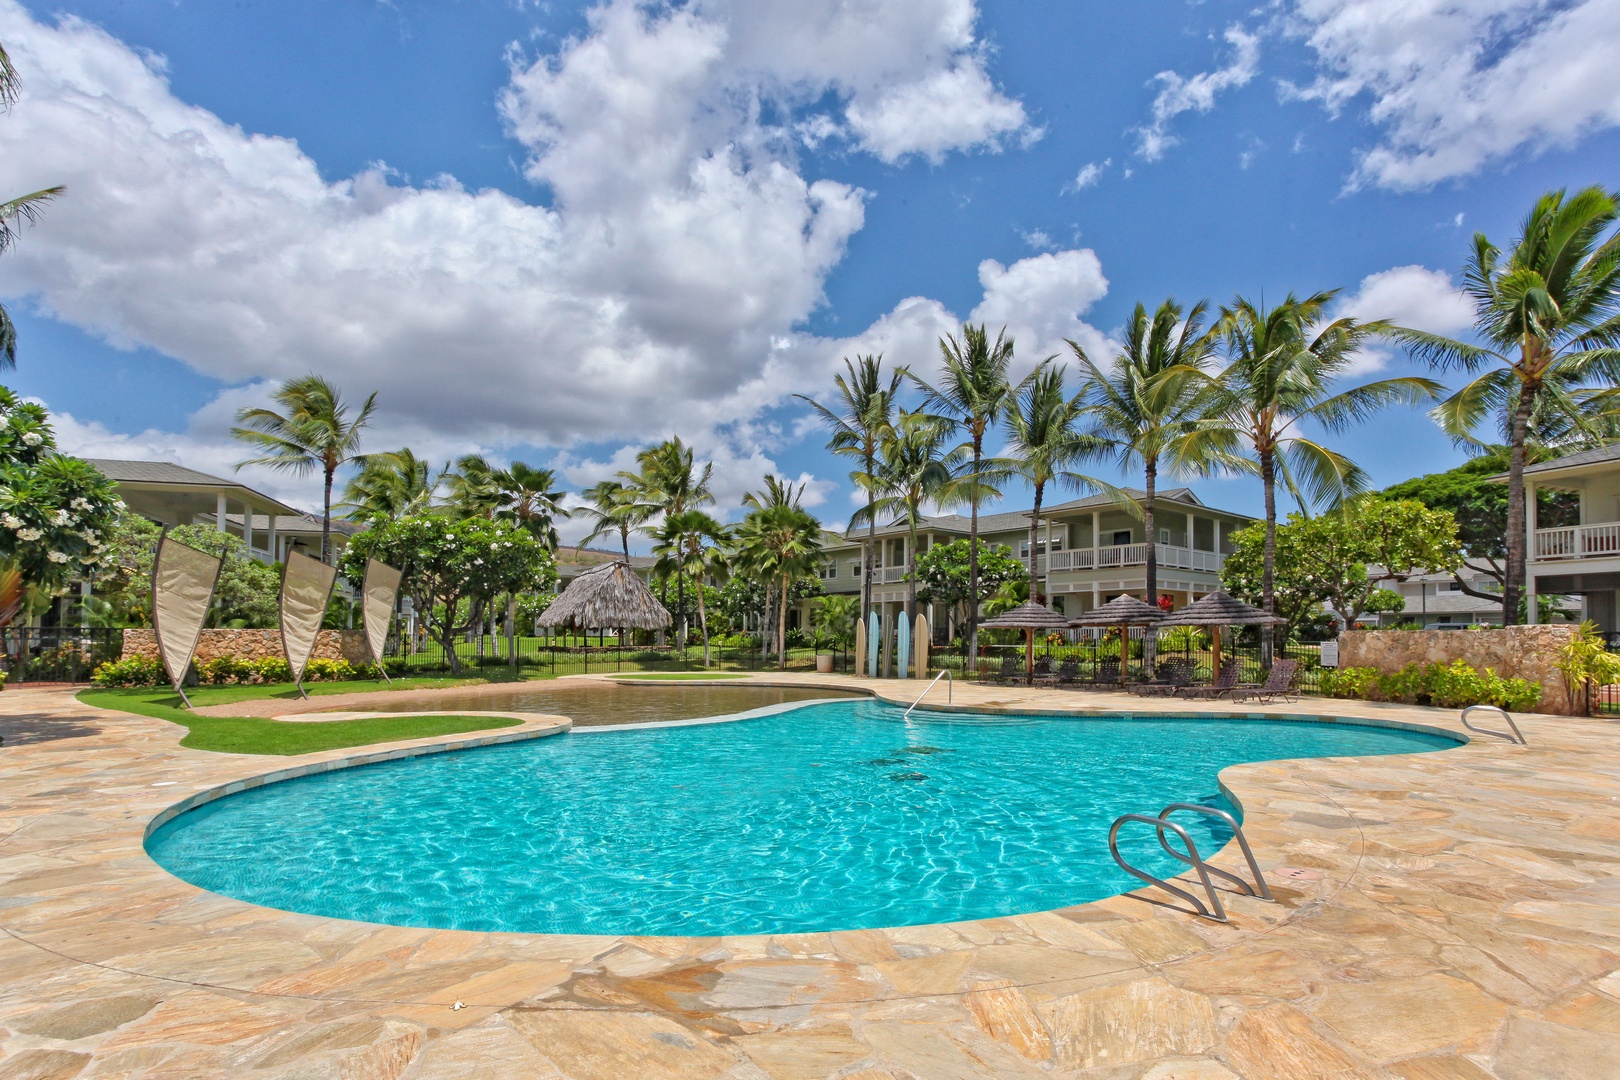 Kapolei Vacation Rentals, Coconut Plantation 1100-2 - Go for a swim in the sparkling waters at the community pool.